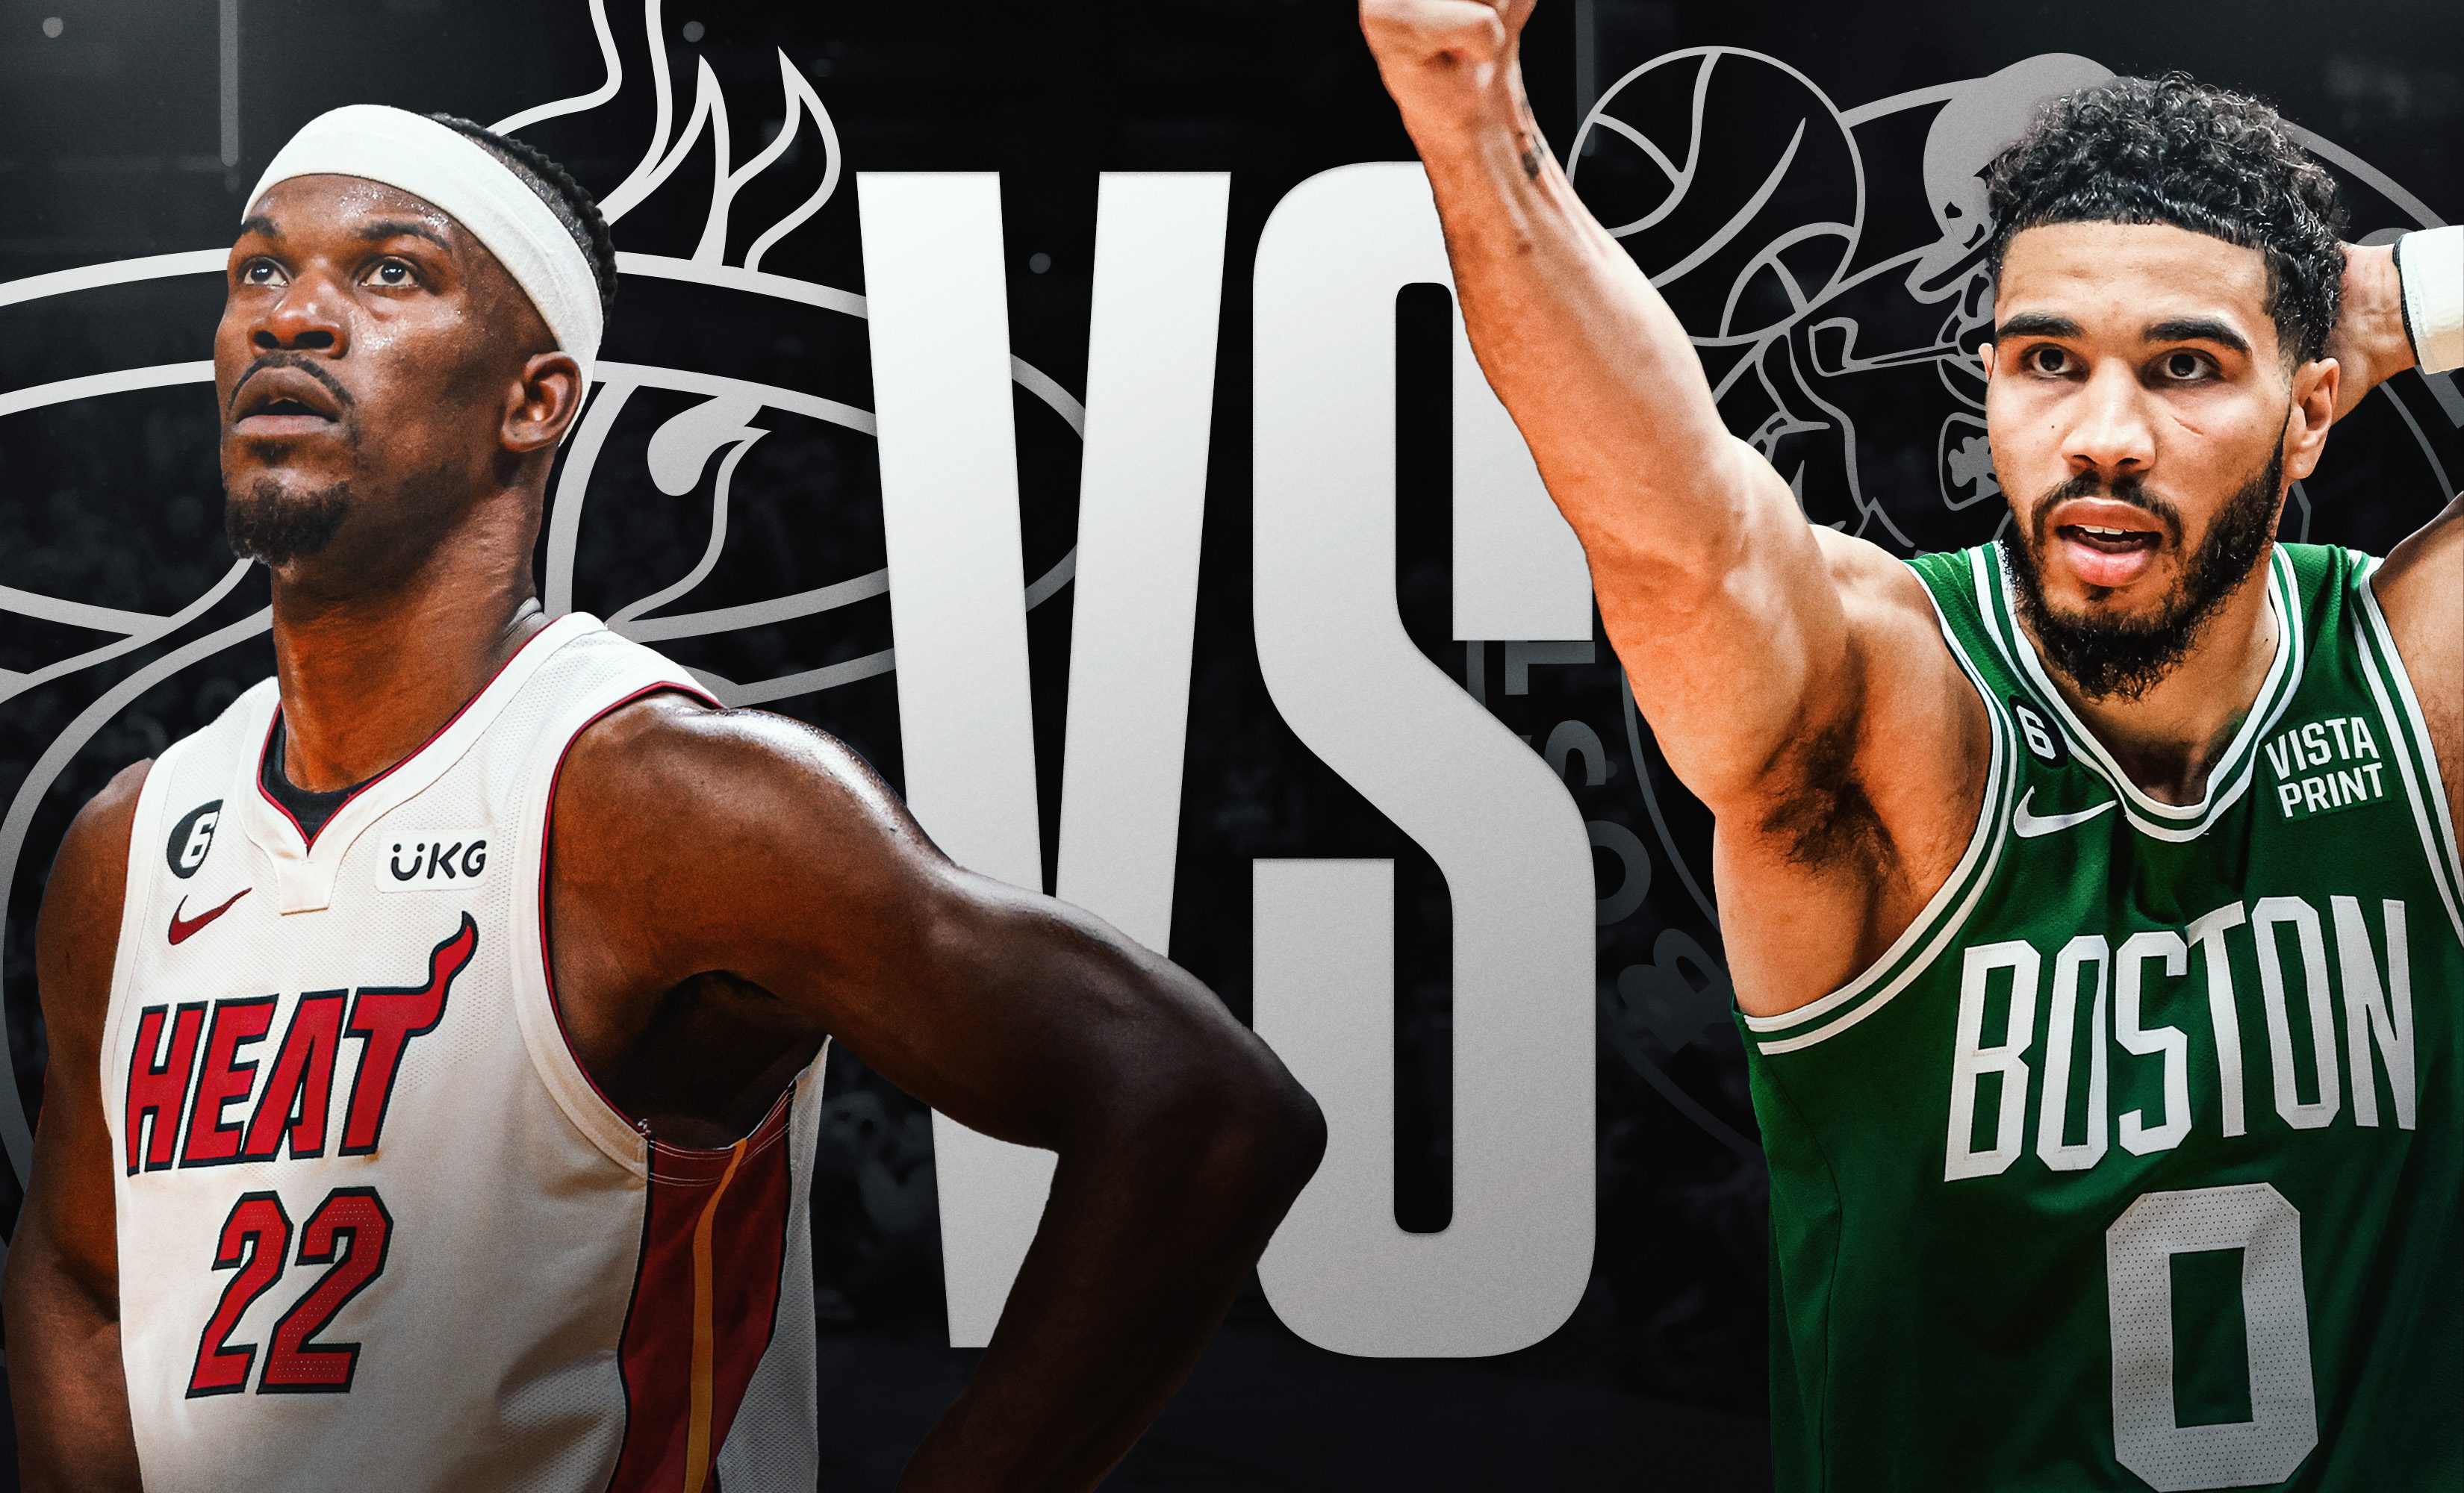 Can Celtics Make History? Celtics vs. Heat Game 7 Playoffs Preview, Odds & Predictions